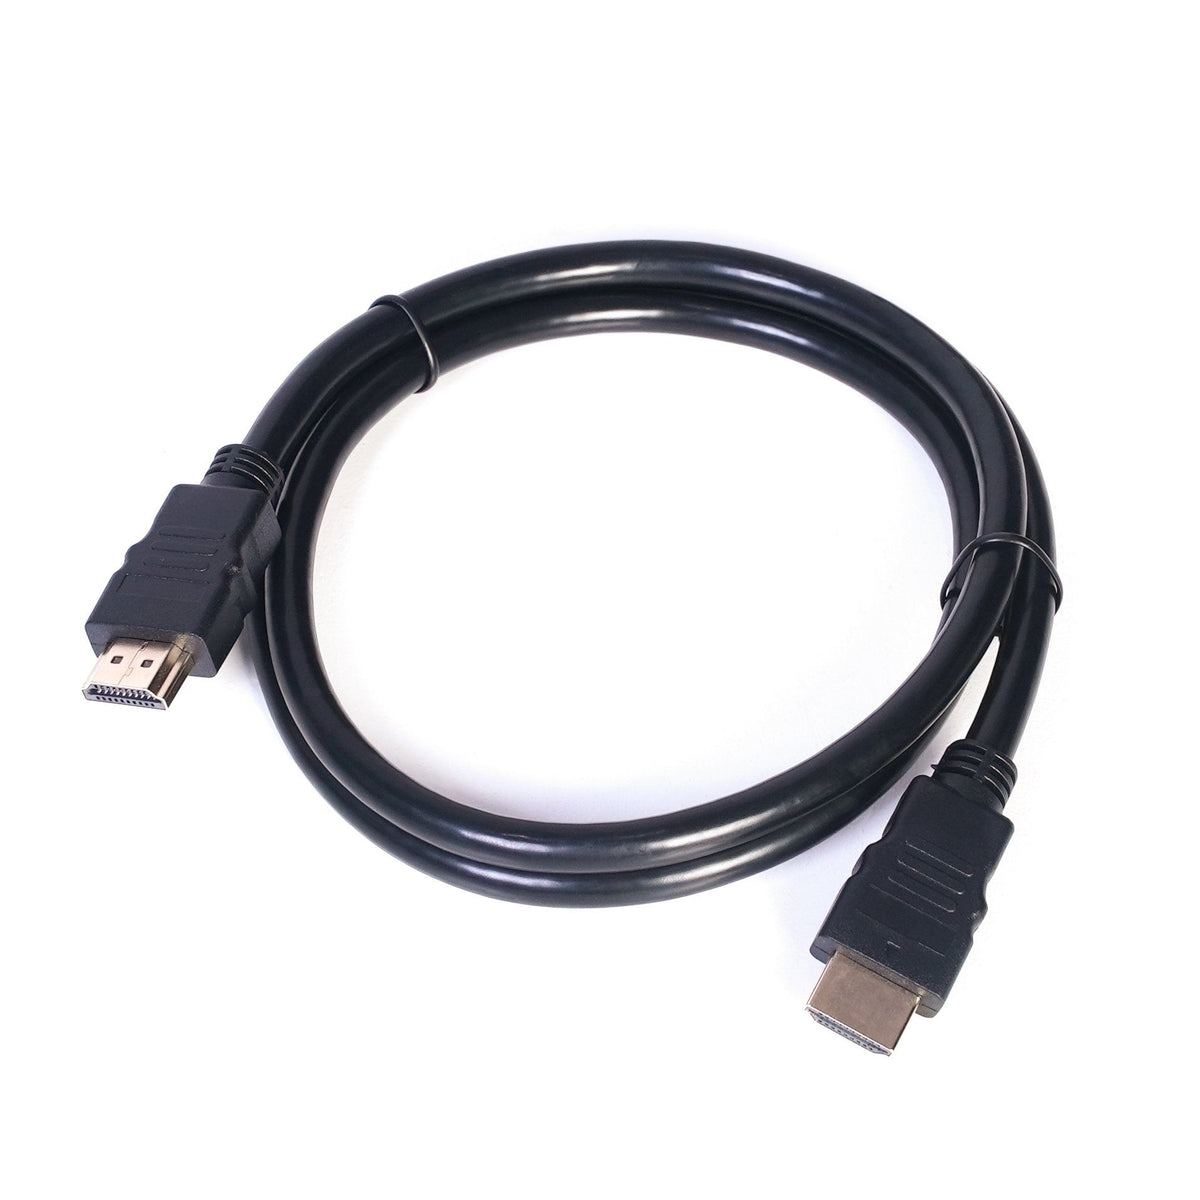 Standard Series HDMI to DVI Cable 3ft